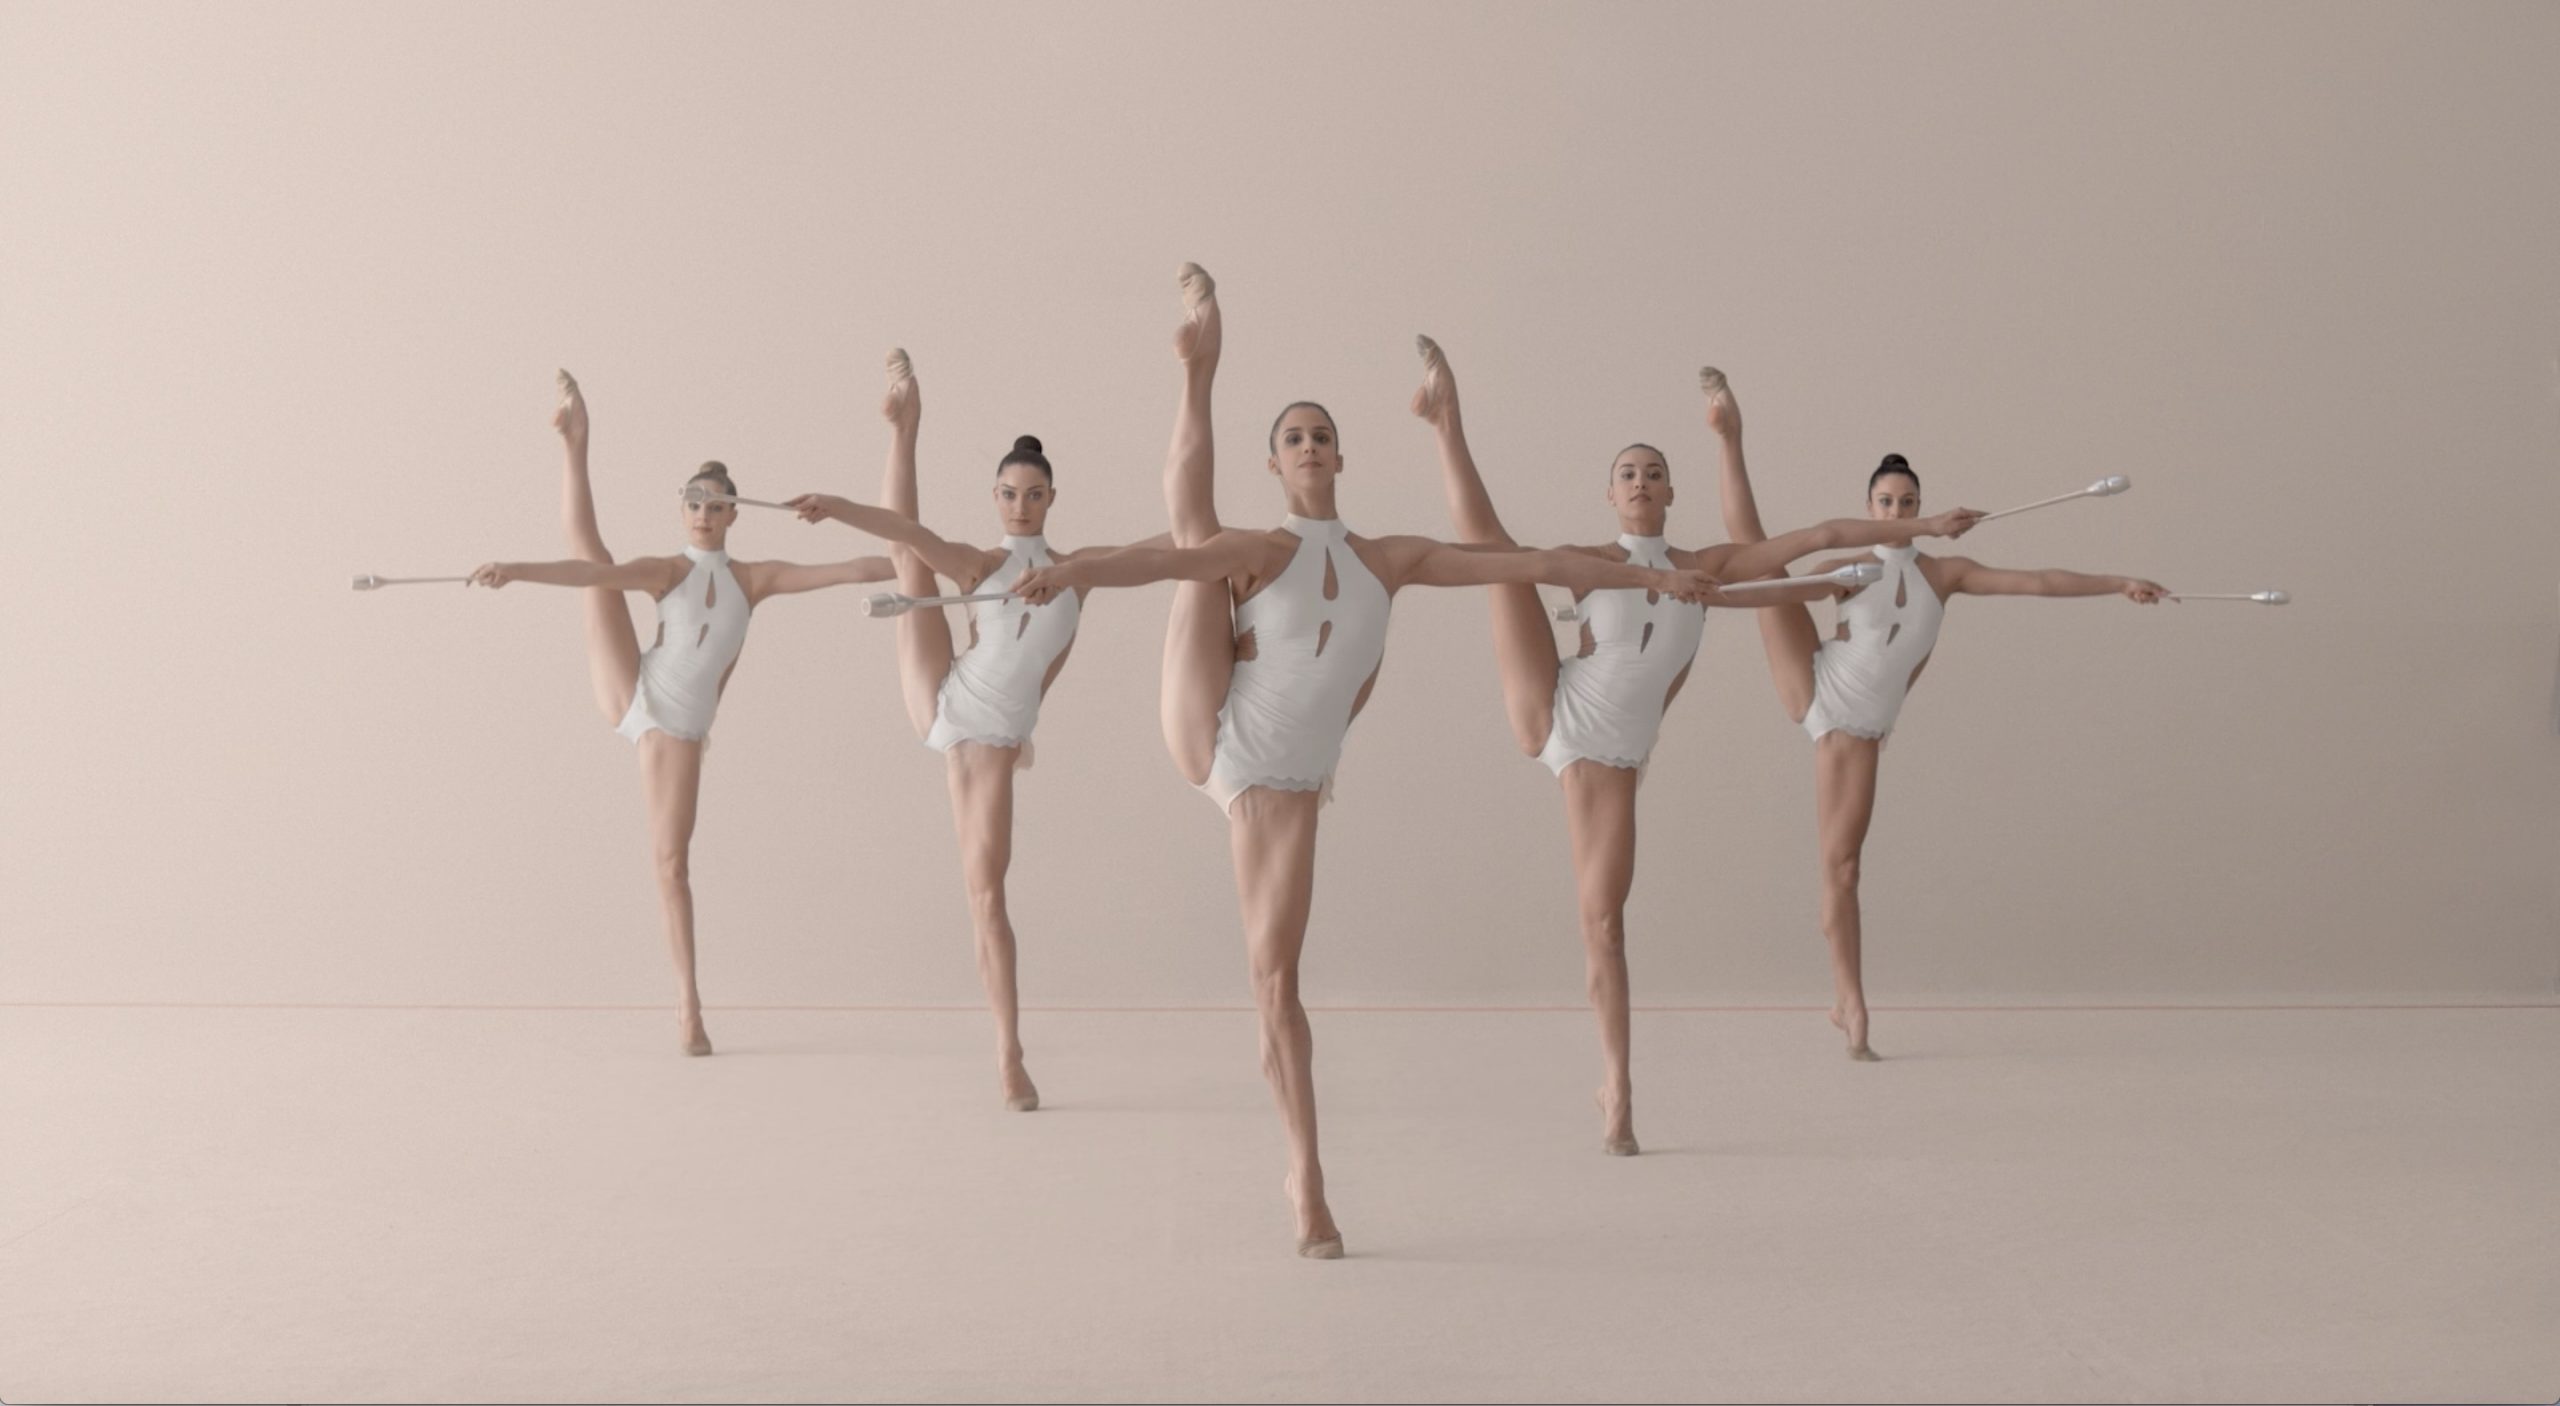 BIONIKE TAKES FLIGHT TOGETHER WITH THE BUTTERFLIES OF THE NATIONAL RHYTHMIC GYMNASTICS TEAM IN THE NEW CAMPAIGN CREATED BY INTESTA